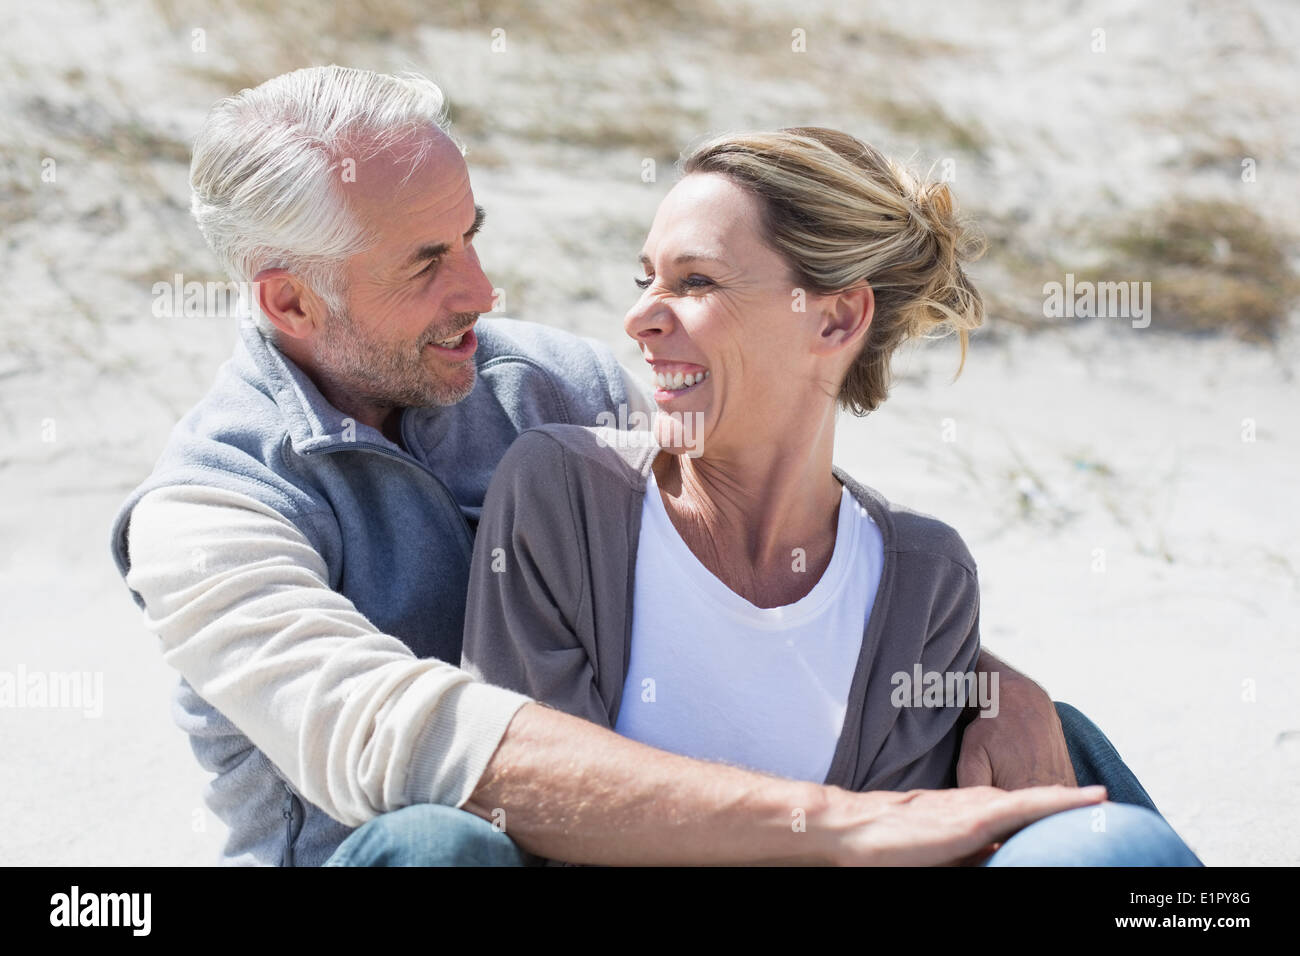 Attractive couple smiling at each other on the beach Stock Photo